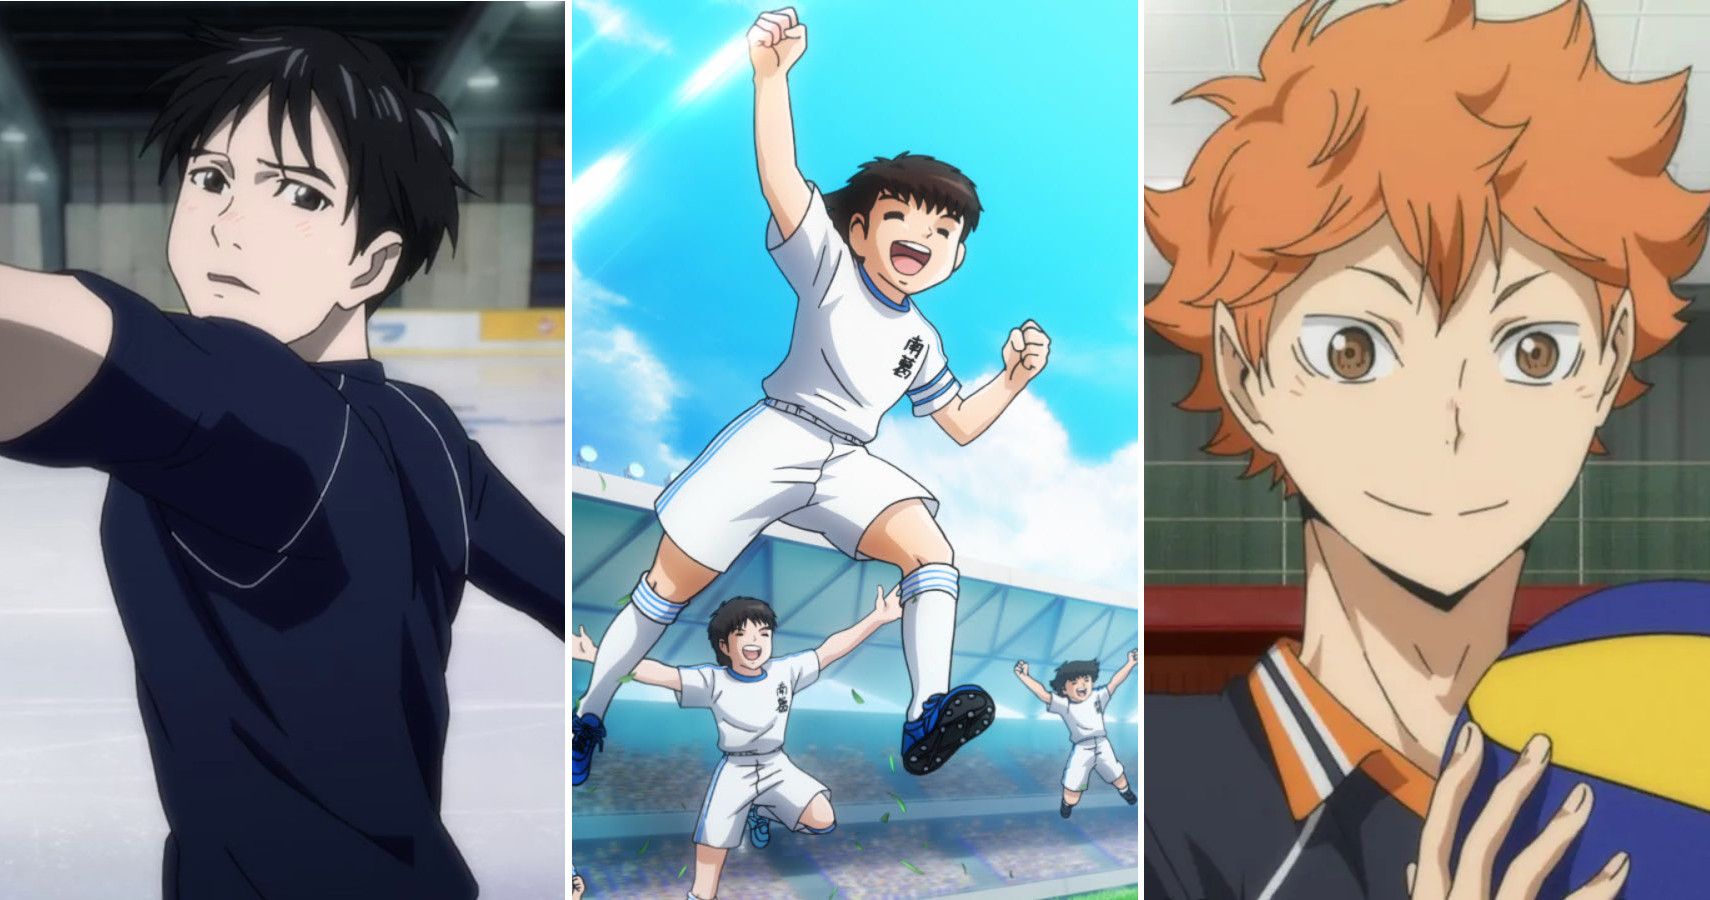 10 Sports Anime To Watch Other Than Haikyuu To Get Your Heart Racing